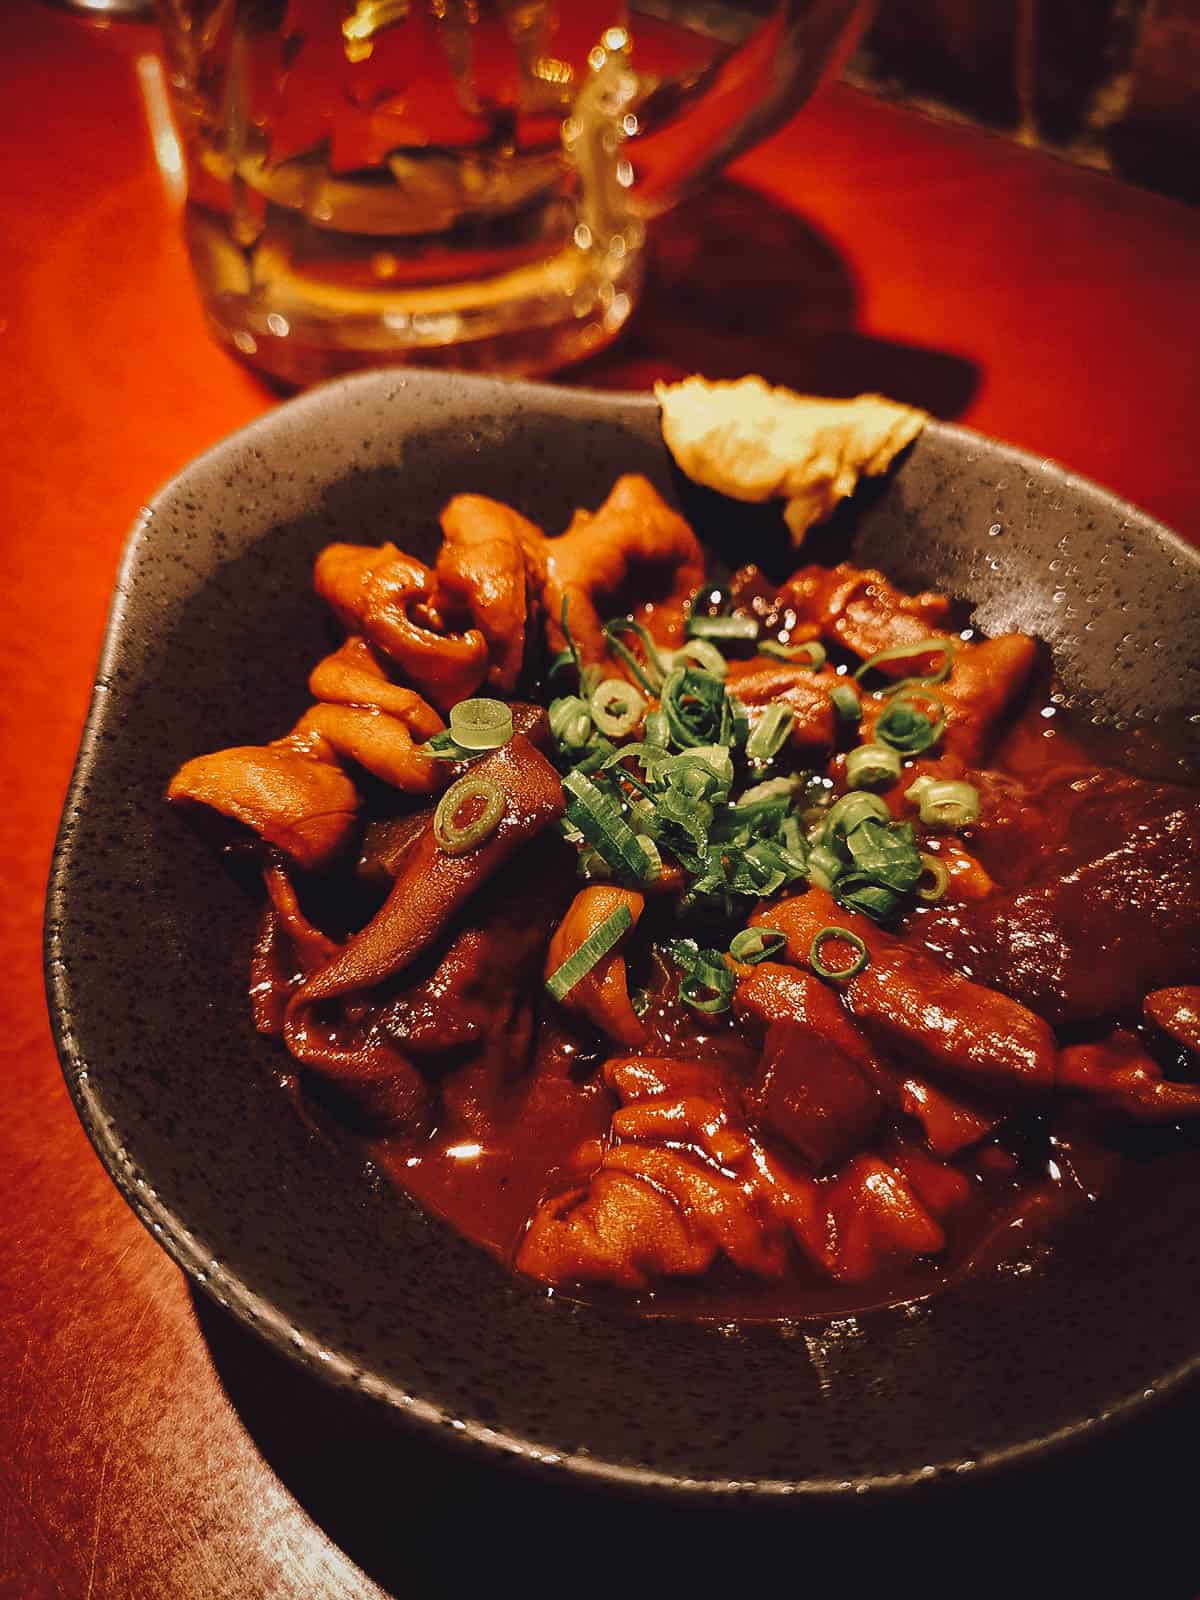 Doteni, a popular bar food of beef offal in Hatcho miso sauce from Nagoya